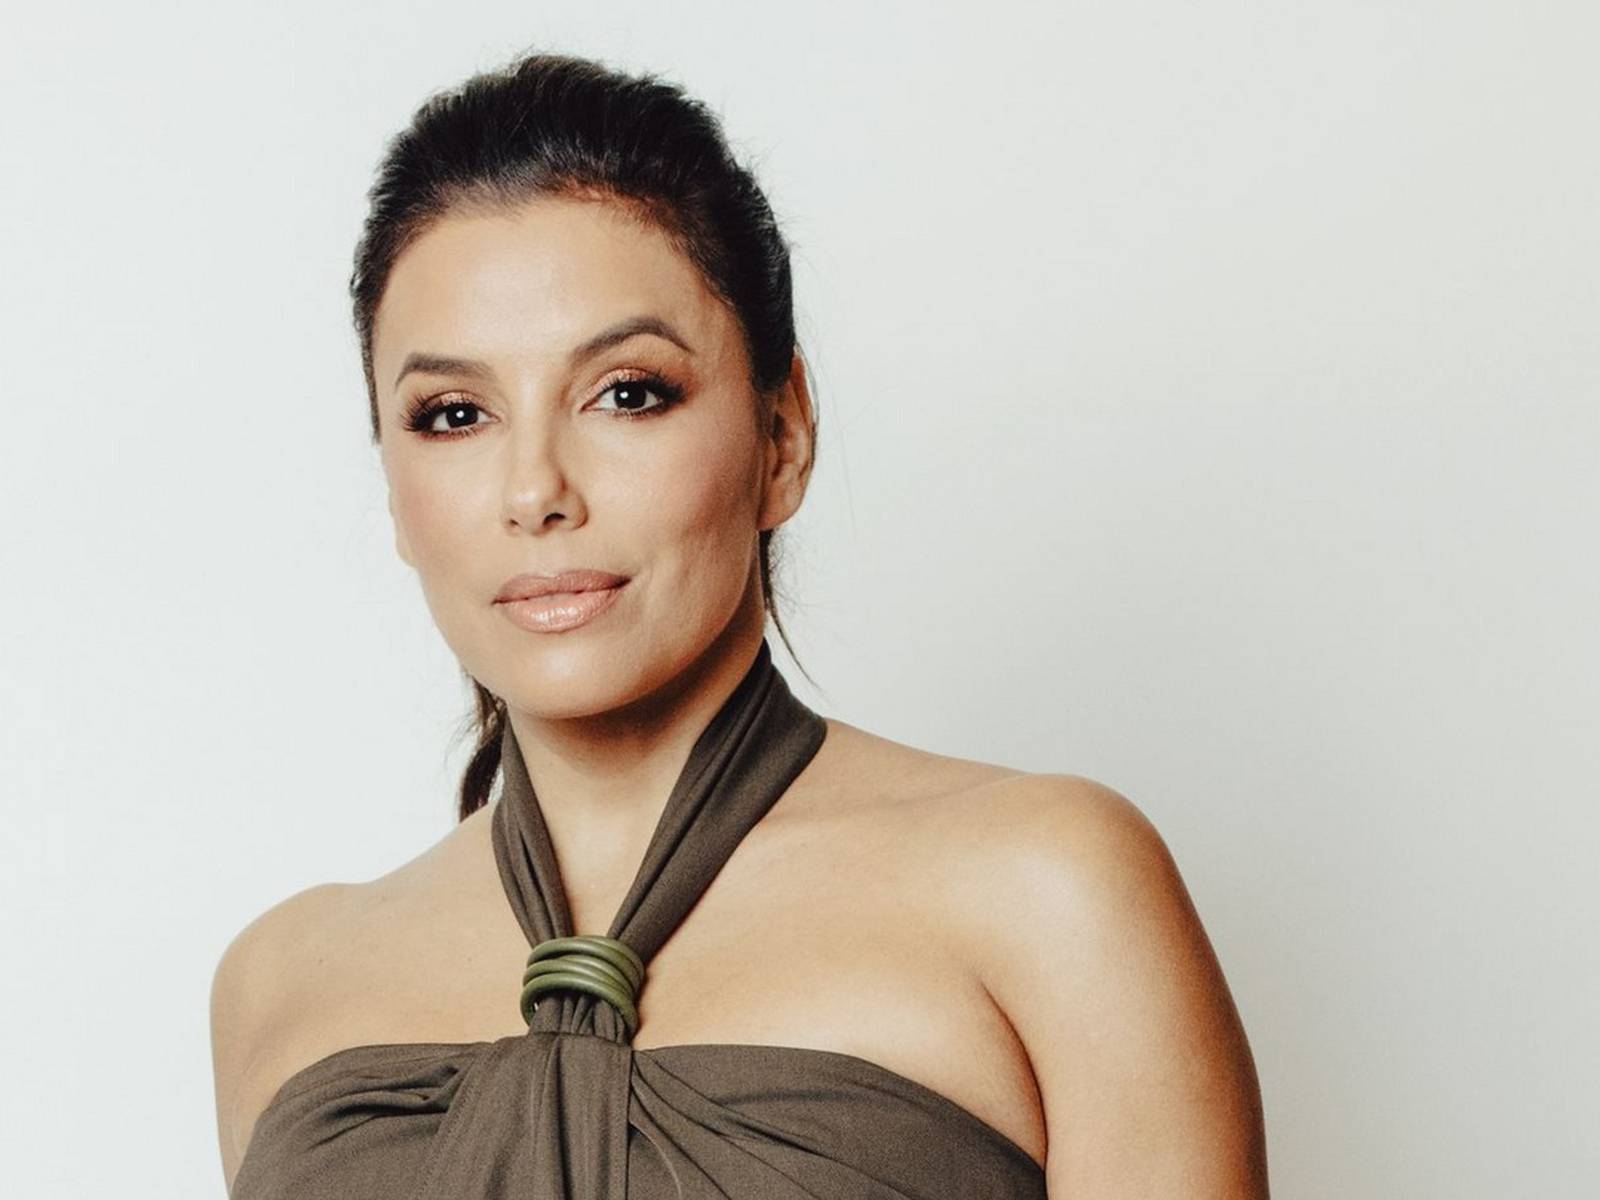 Eva Longoria opens up about older sister with special needs